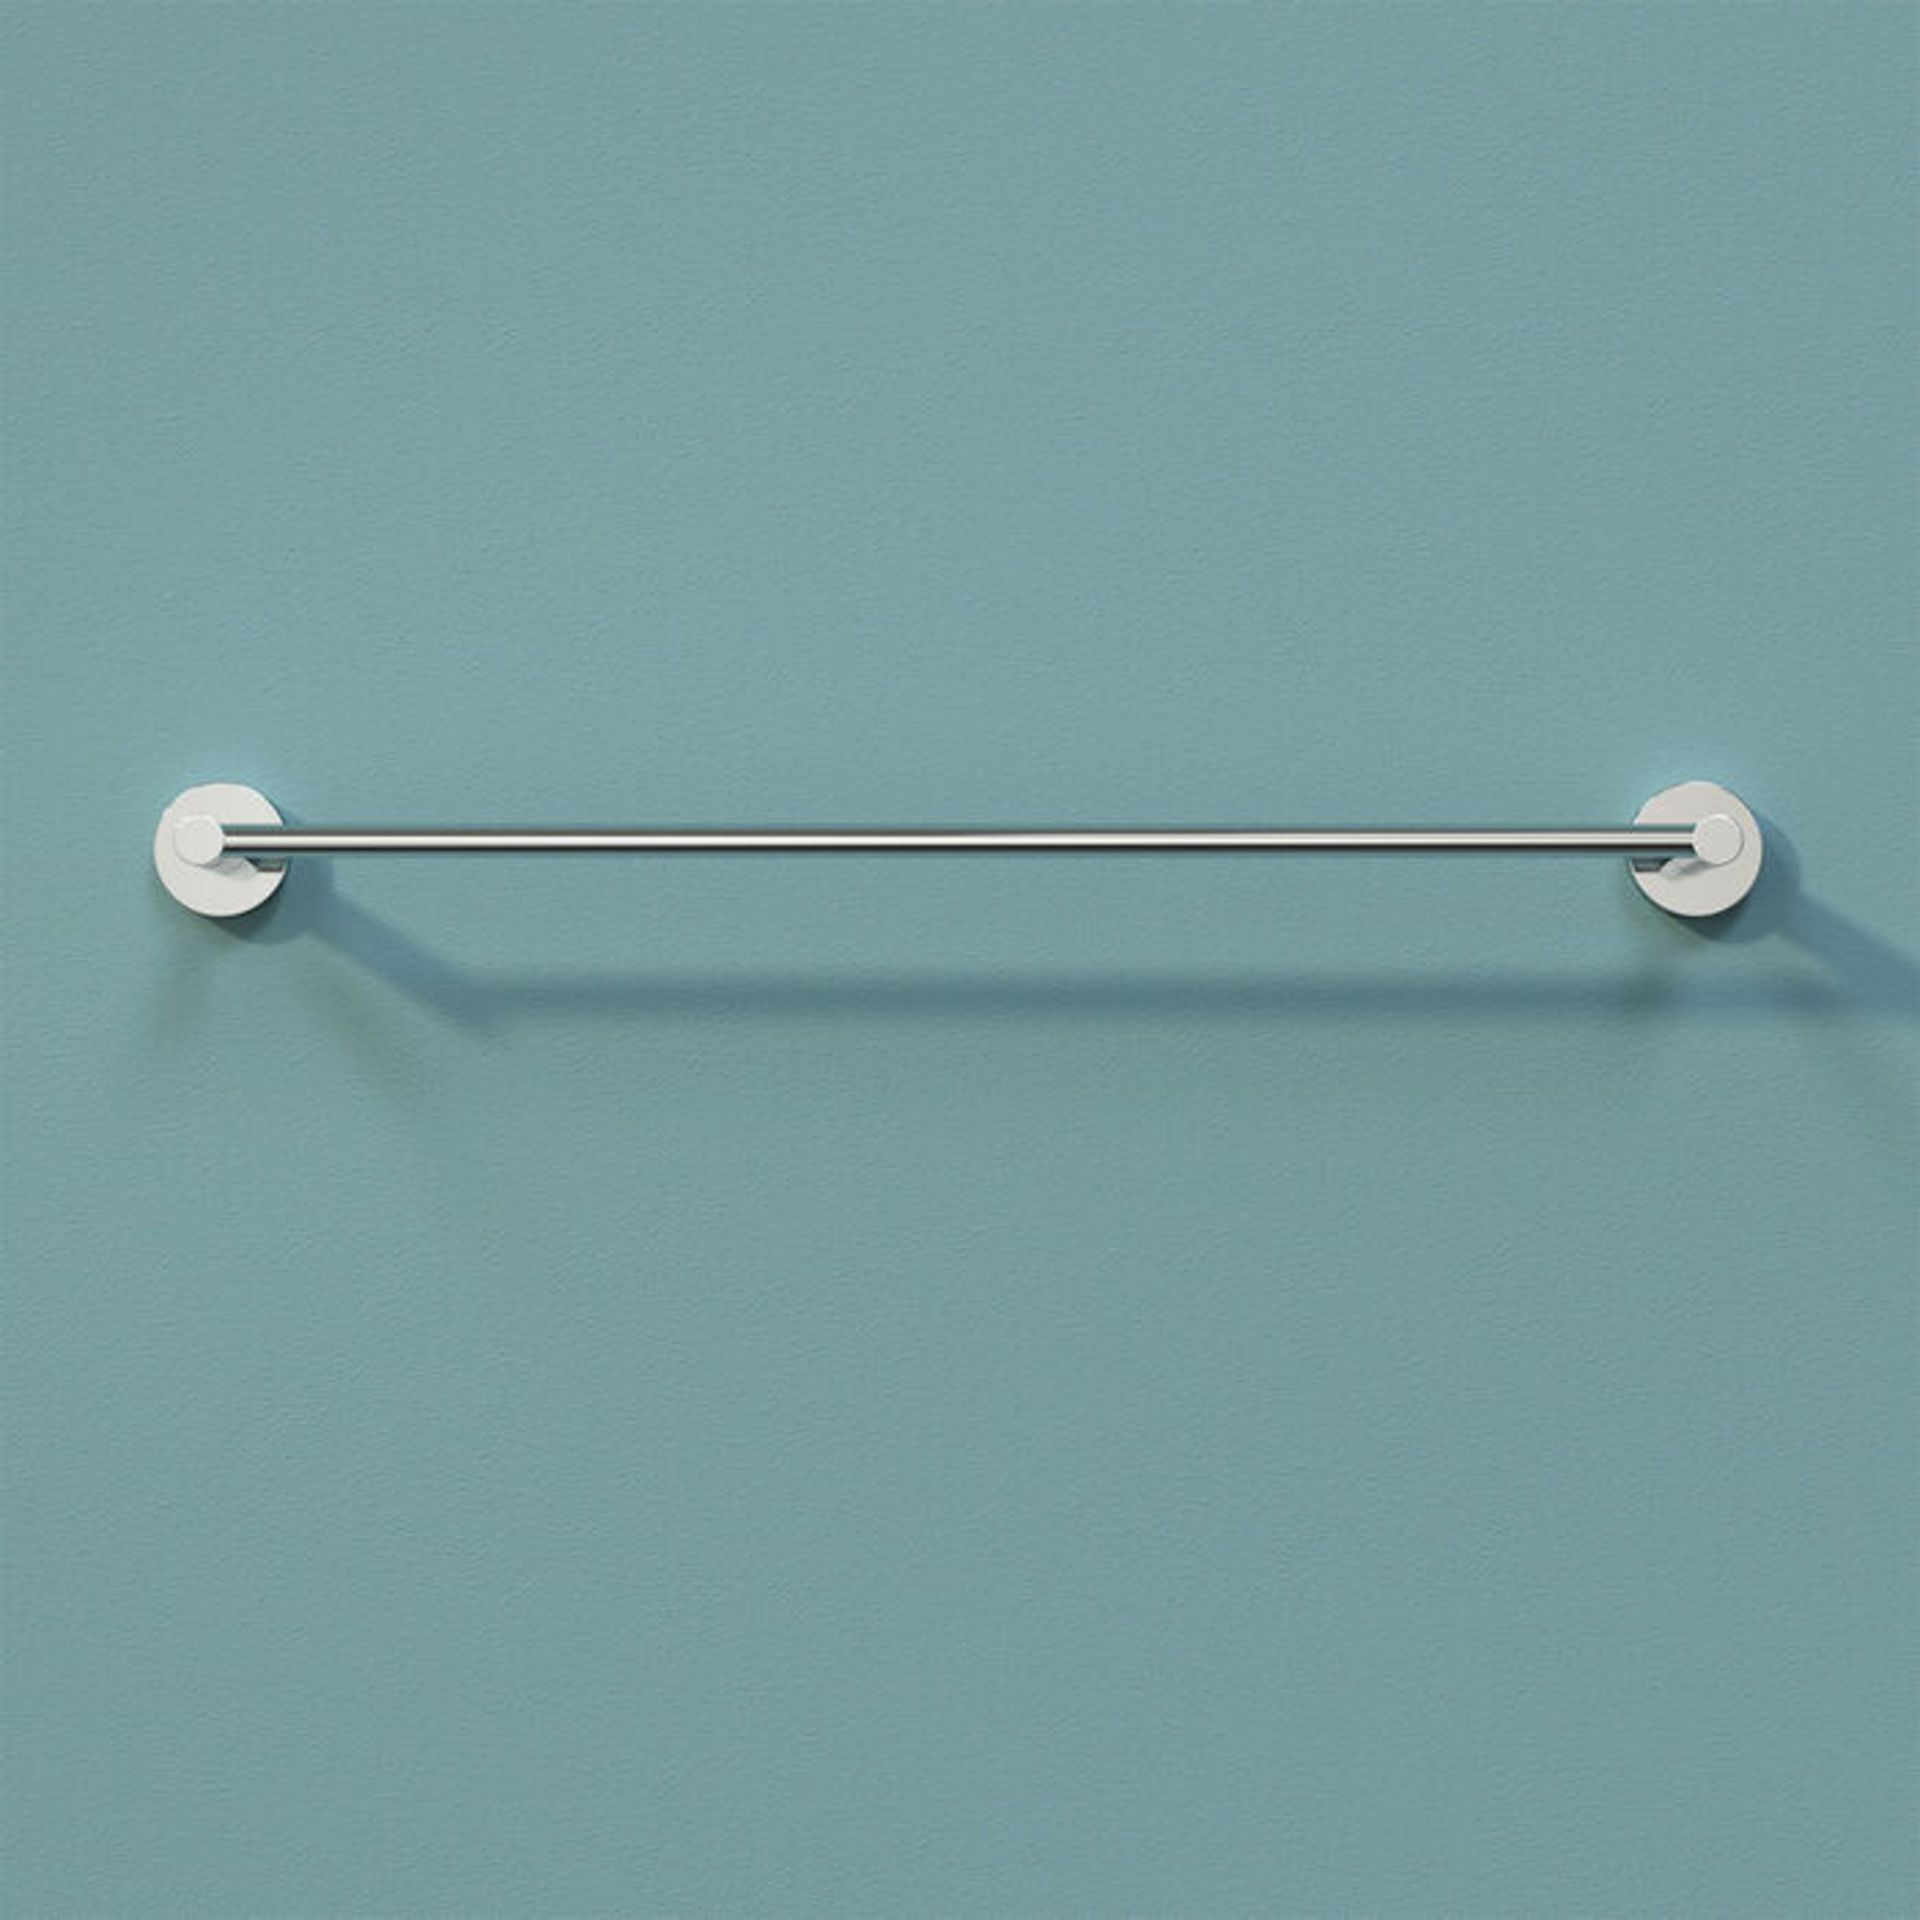 (PP1005) Finsbury Towel Rail. Designed to conceal all fittings Completes your bathroom with ... - Image 3 of 3